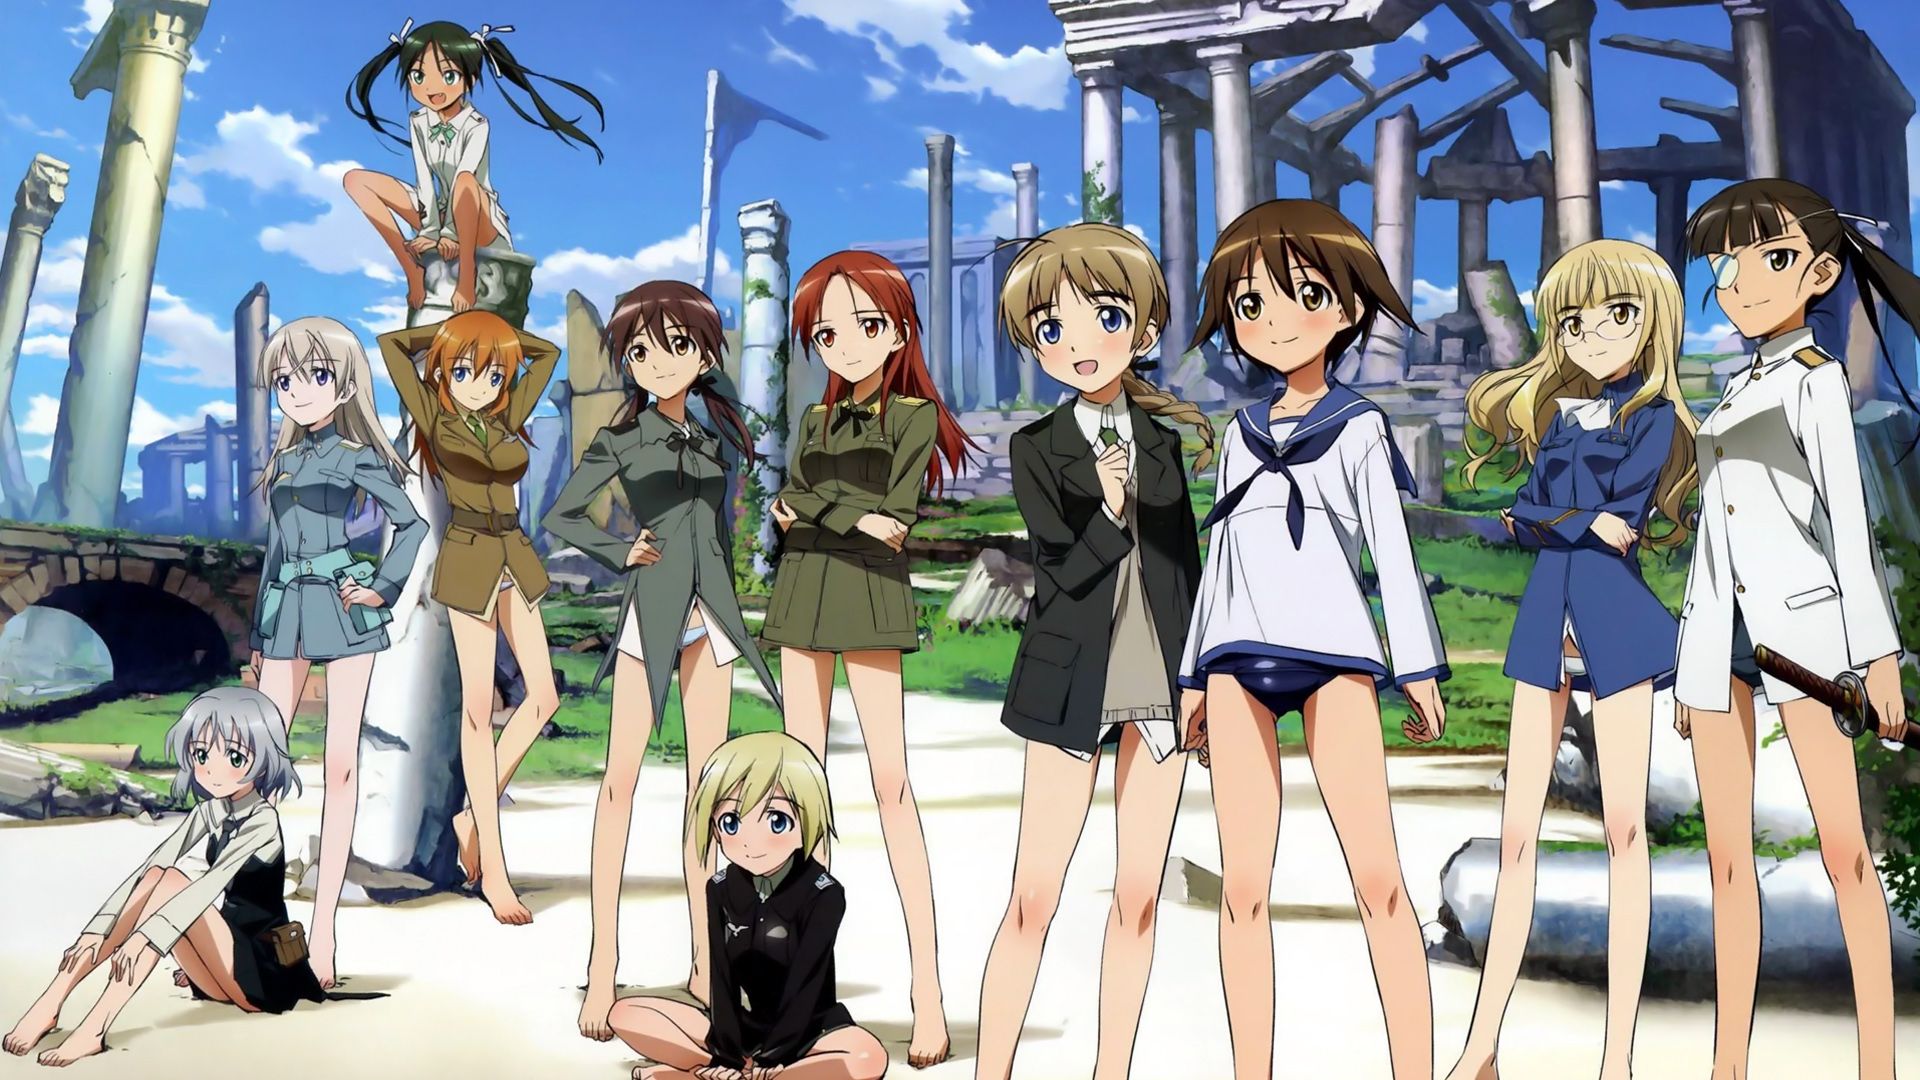 Strike Witches background